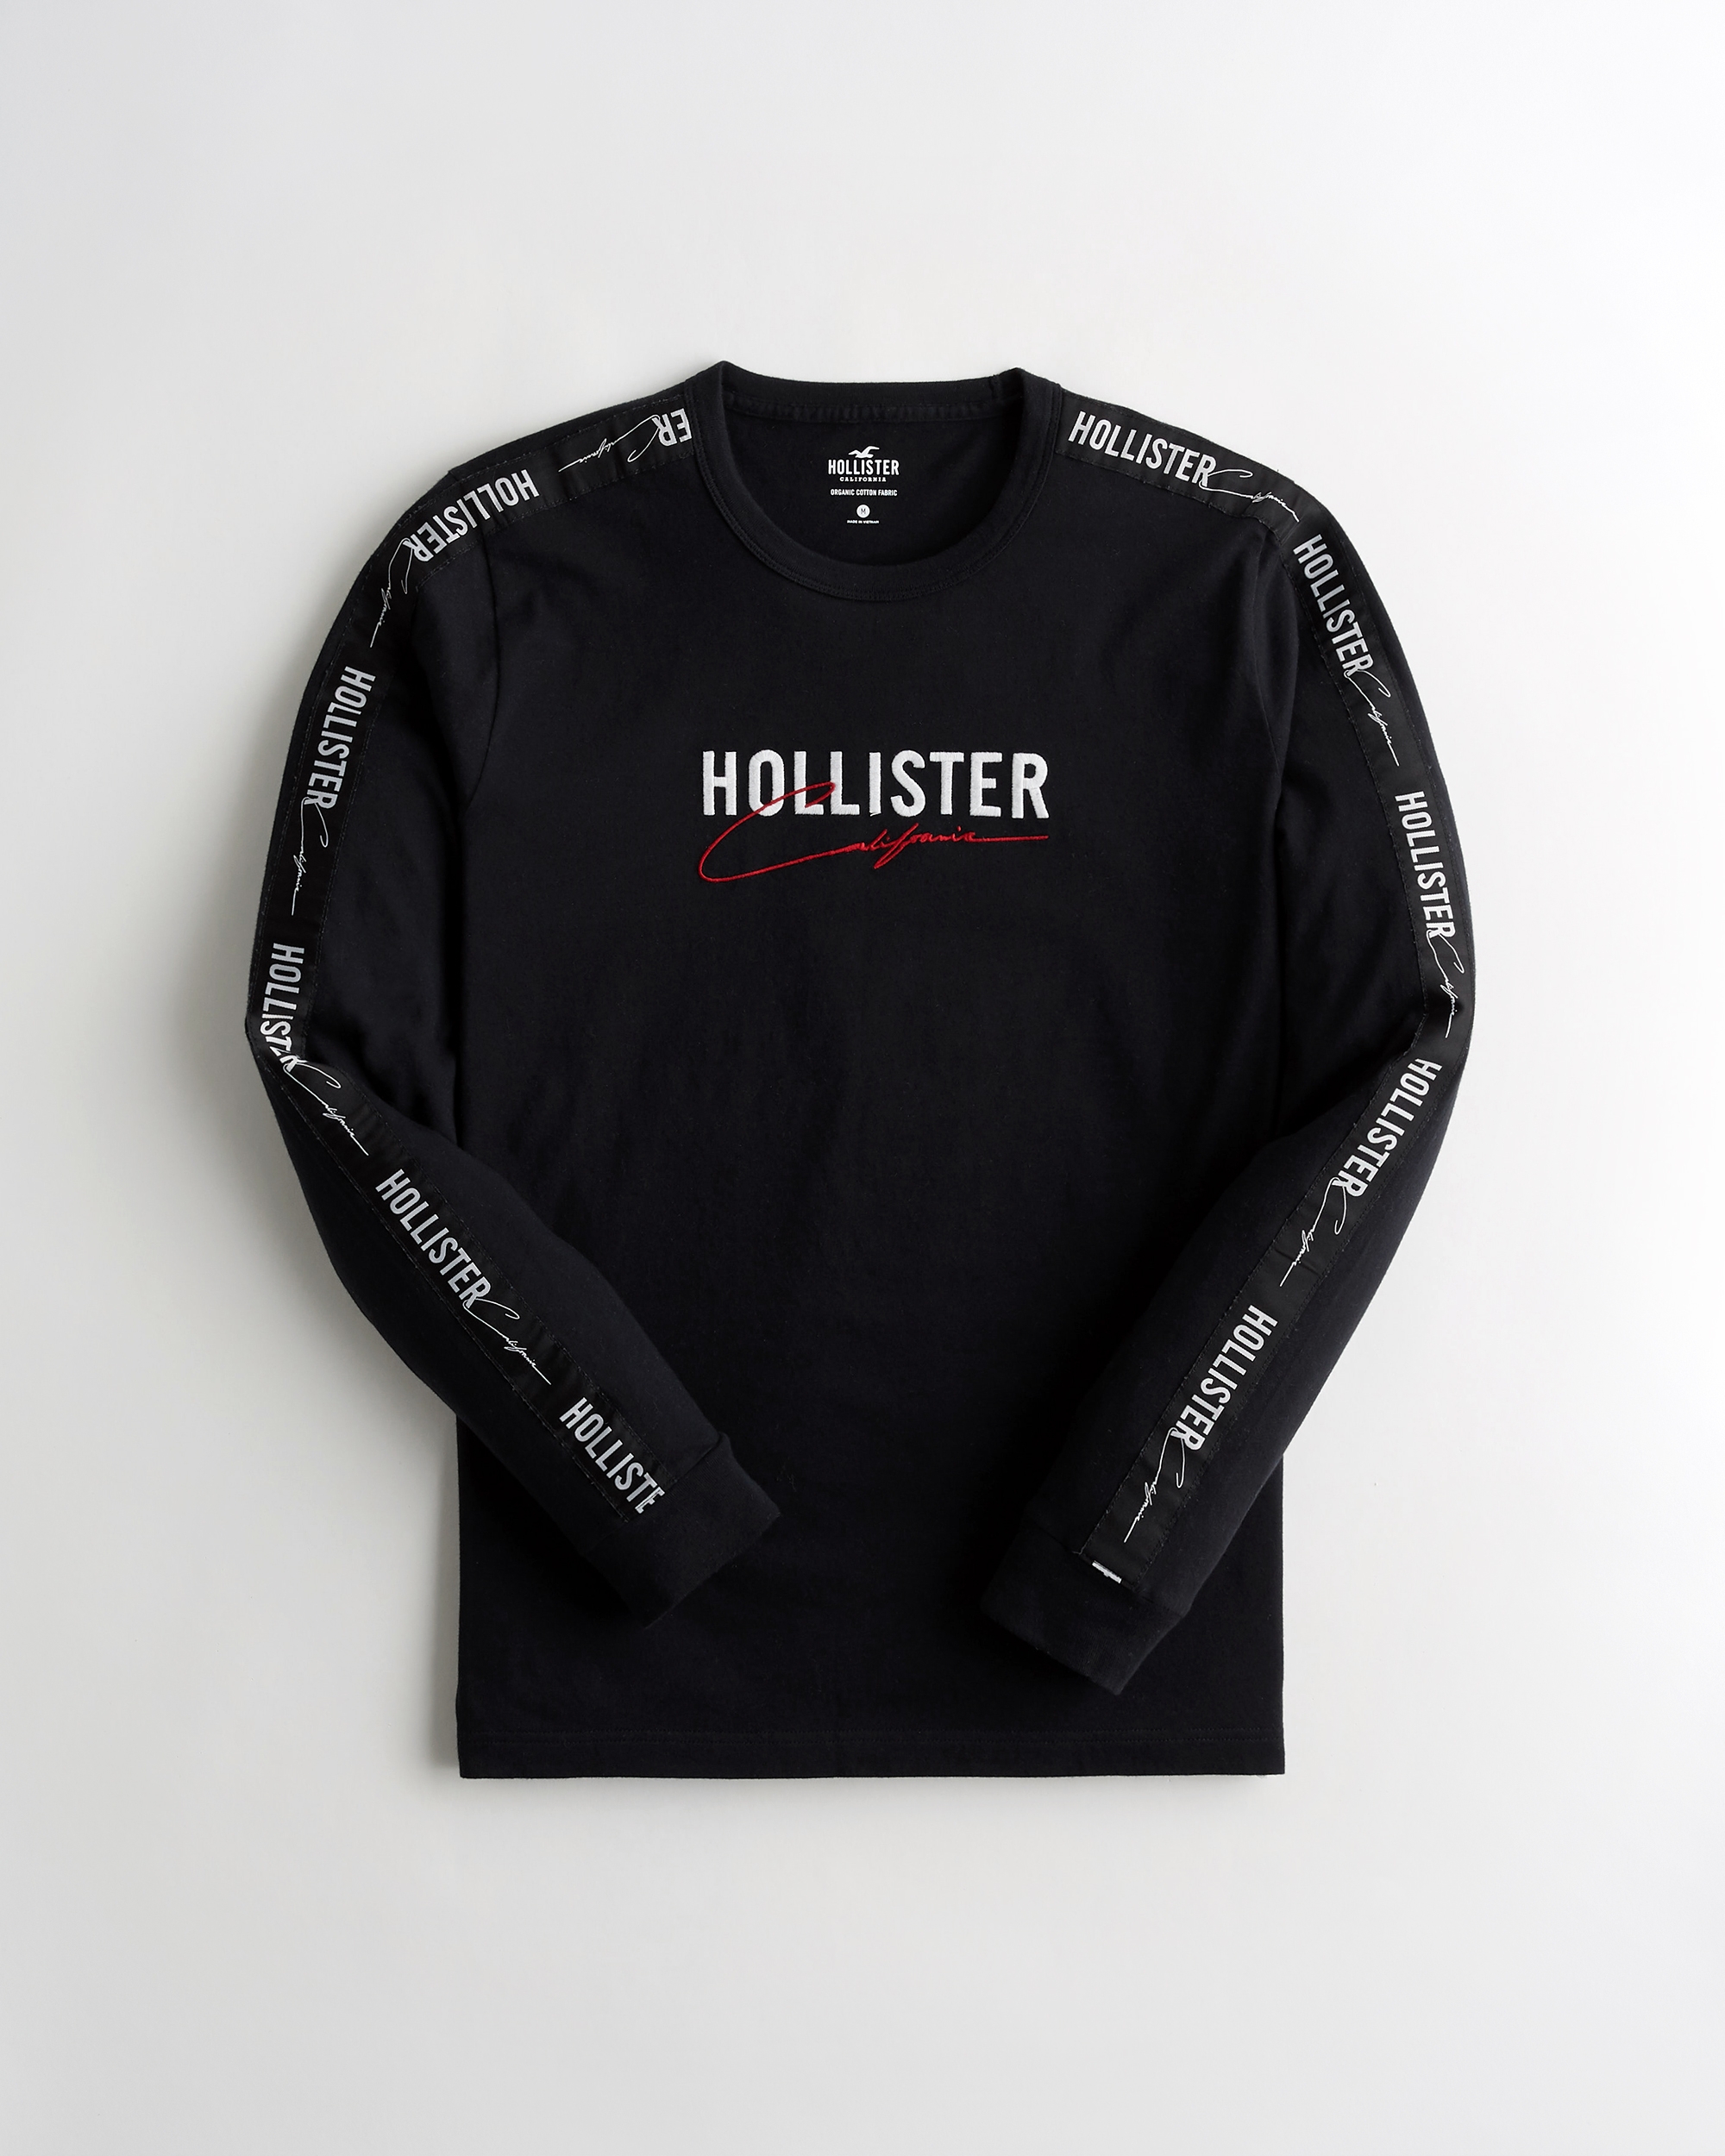 where are hollister clothes manufactured